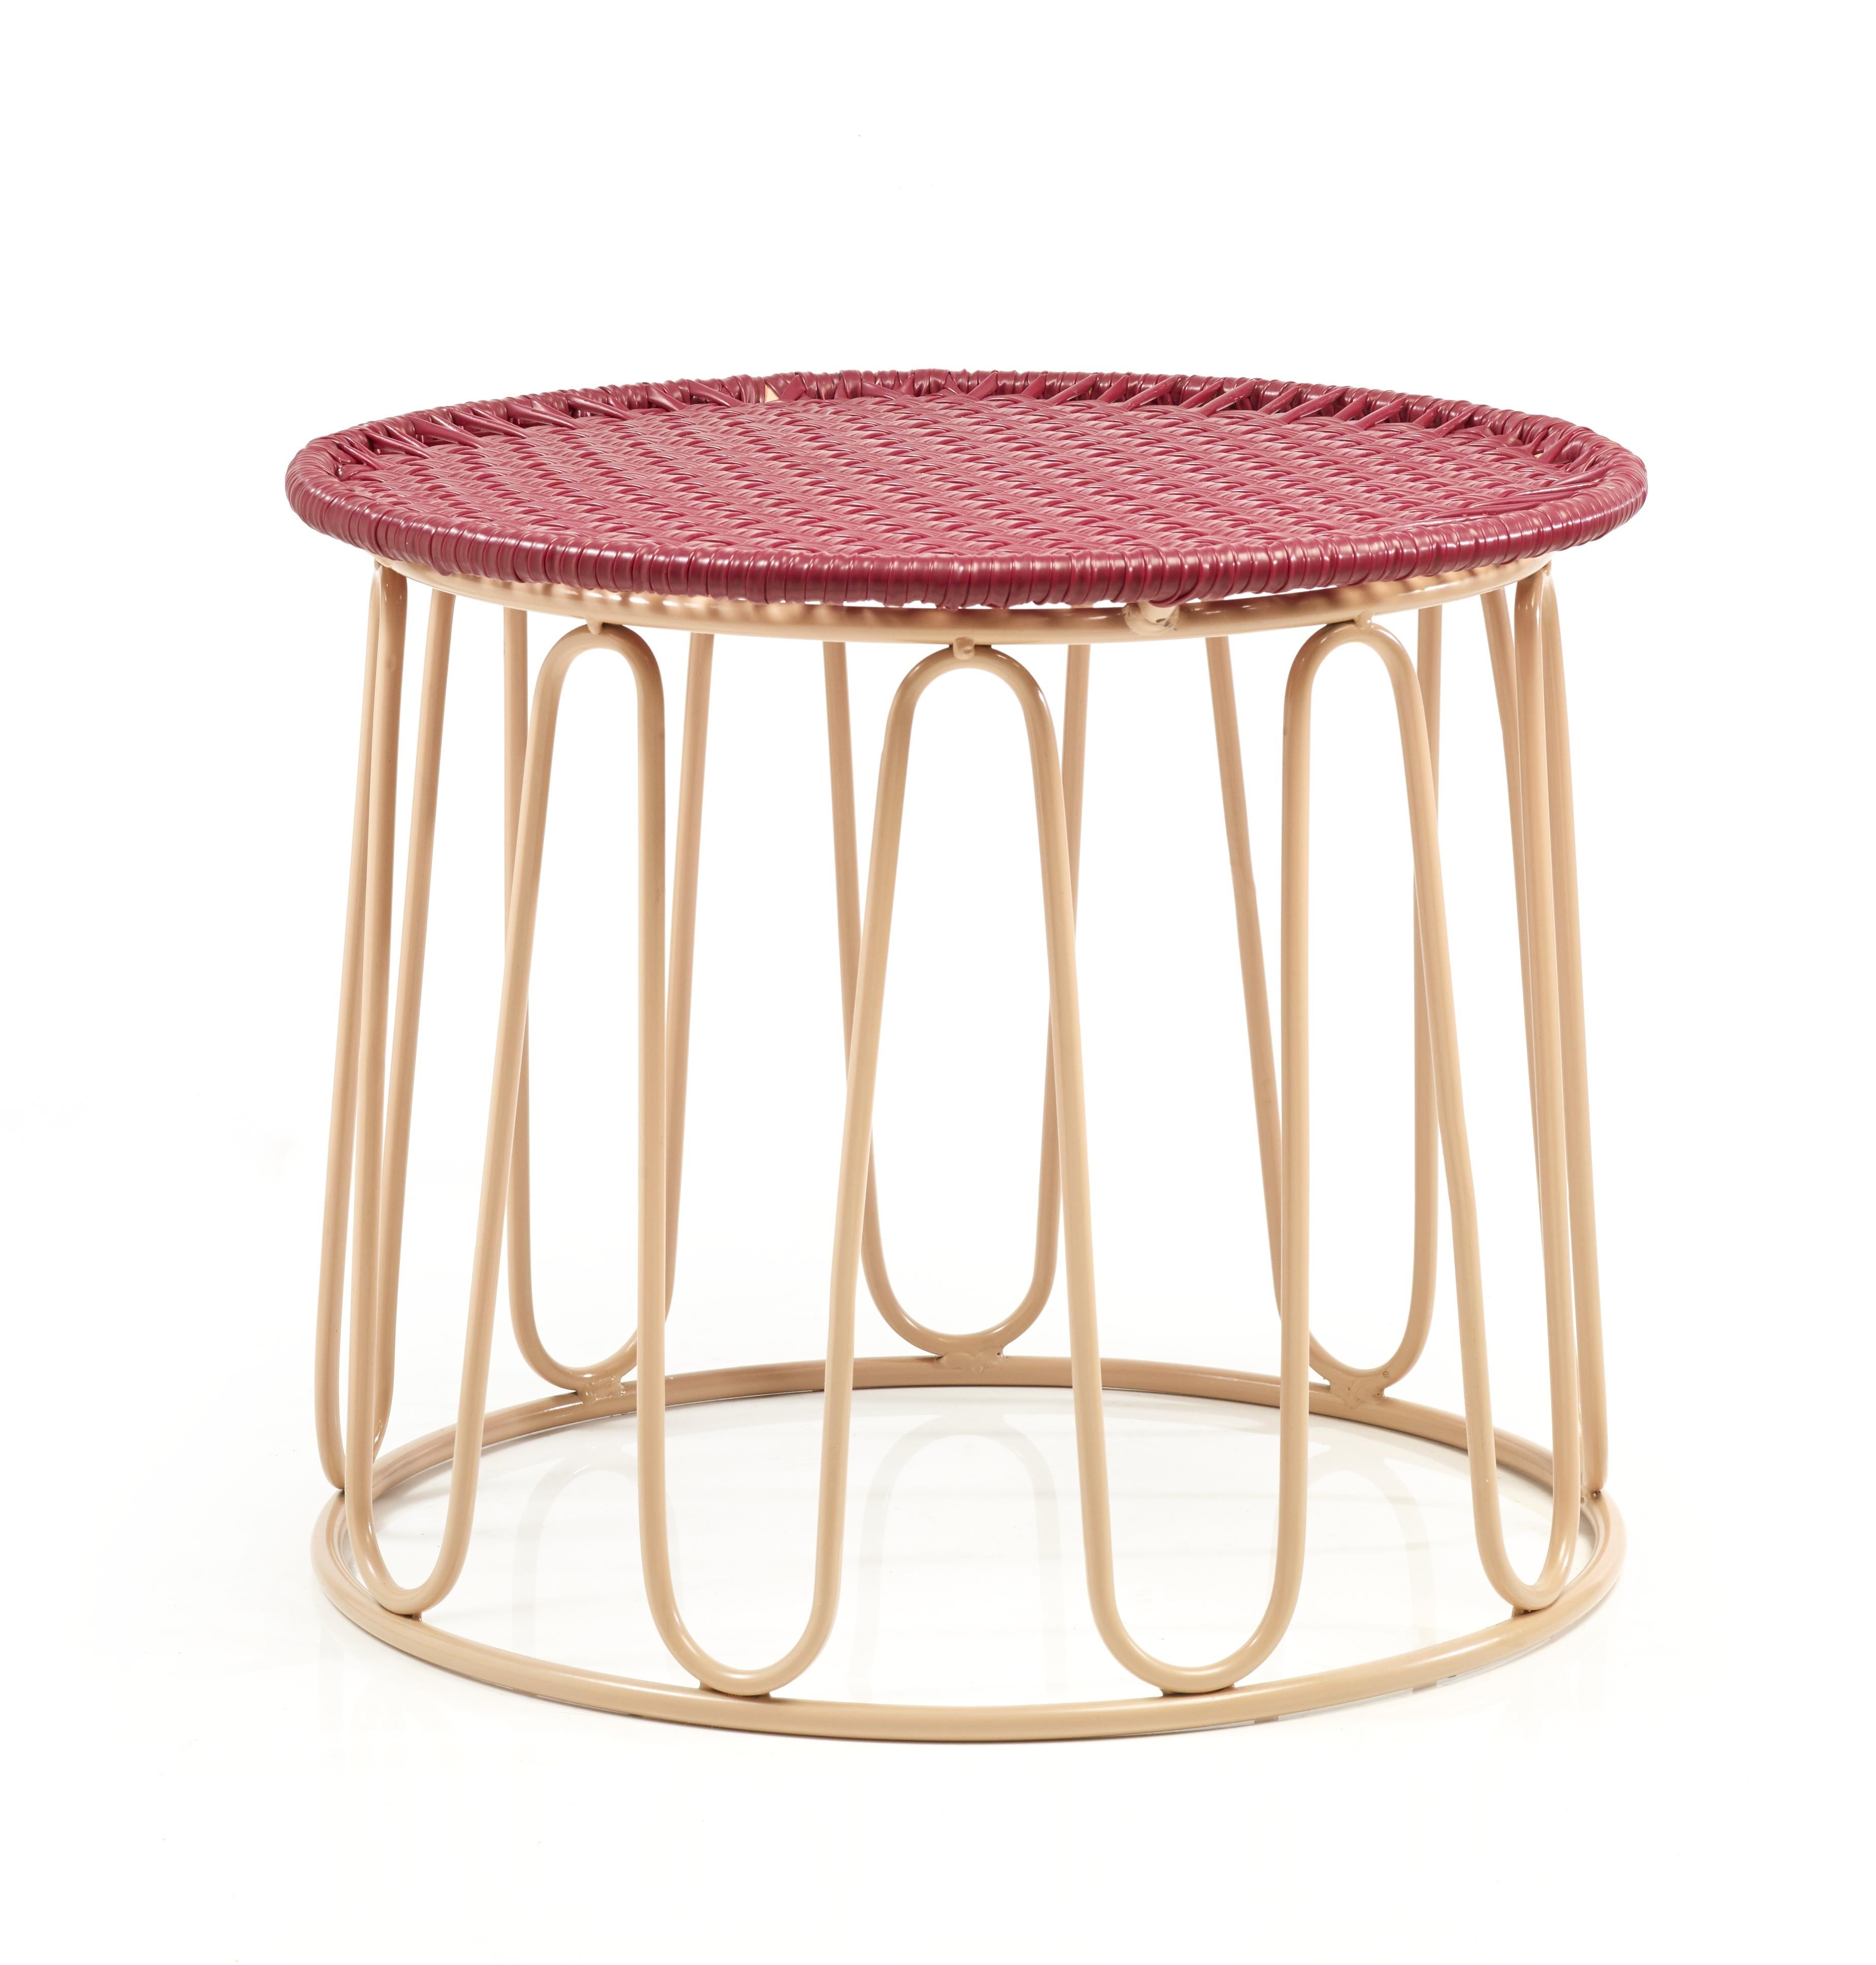 Purple circo side table by Sebastian Herkner
Materials: Galvanized and powder-coated tubular steel. PVC strings.
Technique: Made from recycled plastic. Weaved by local craftspeople in Colombia. 
Dimensions: 
Top diameter 55 cm 
Base diameter 51